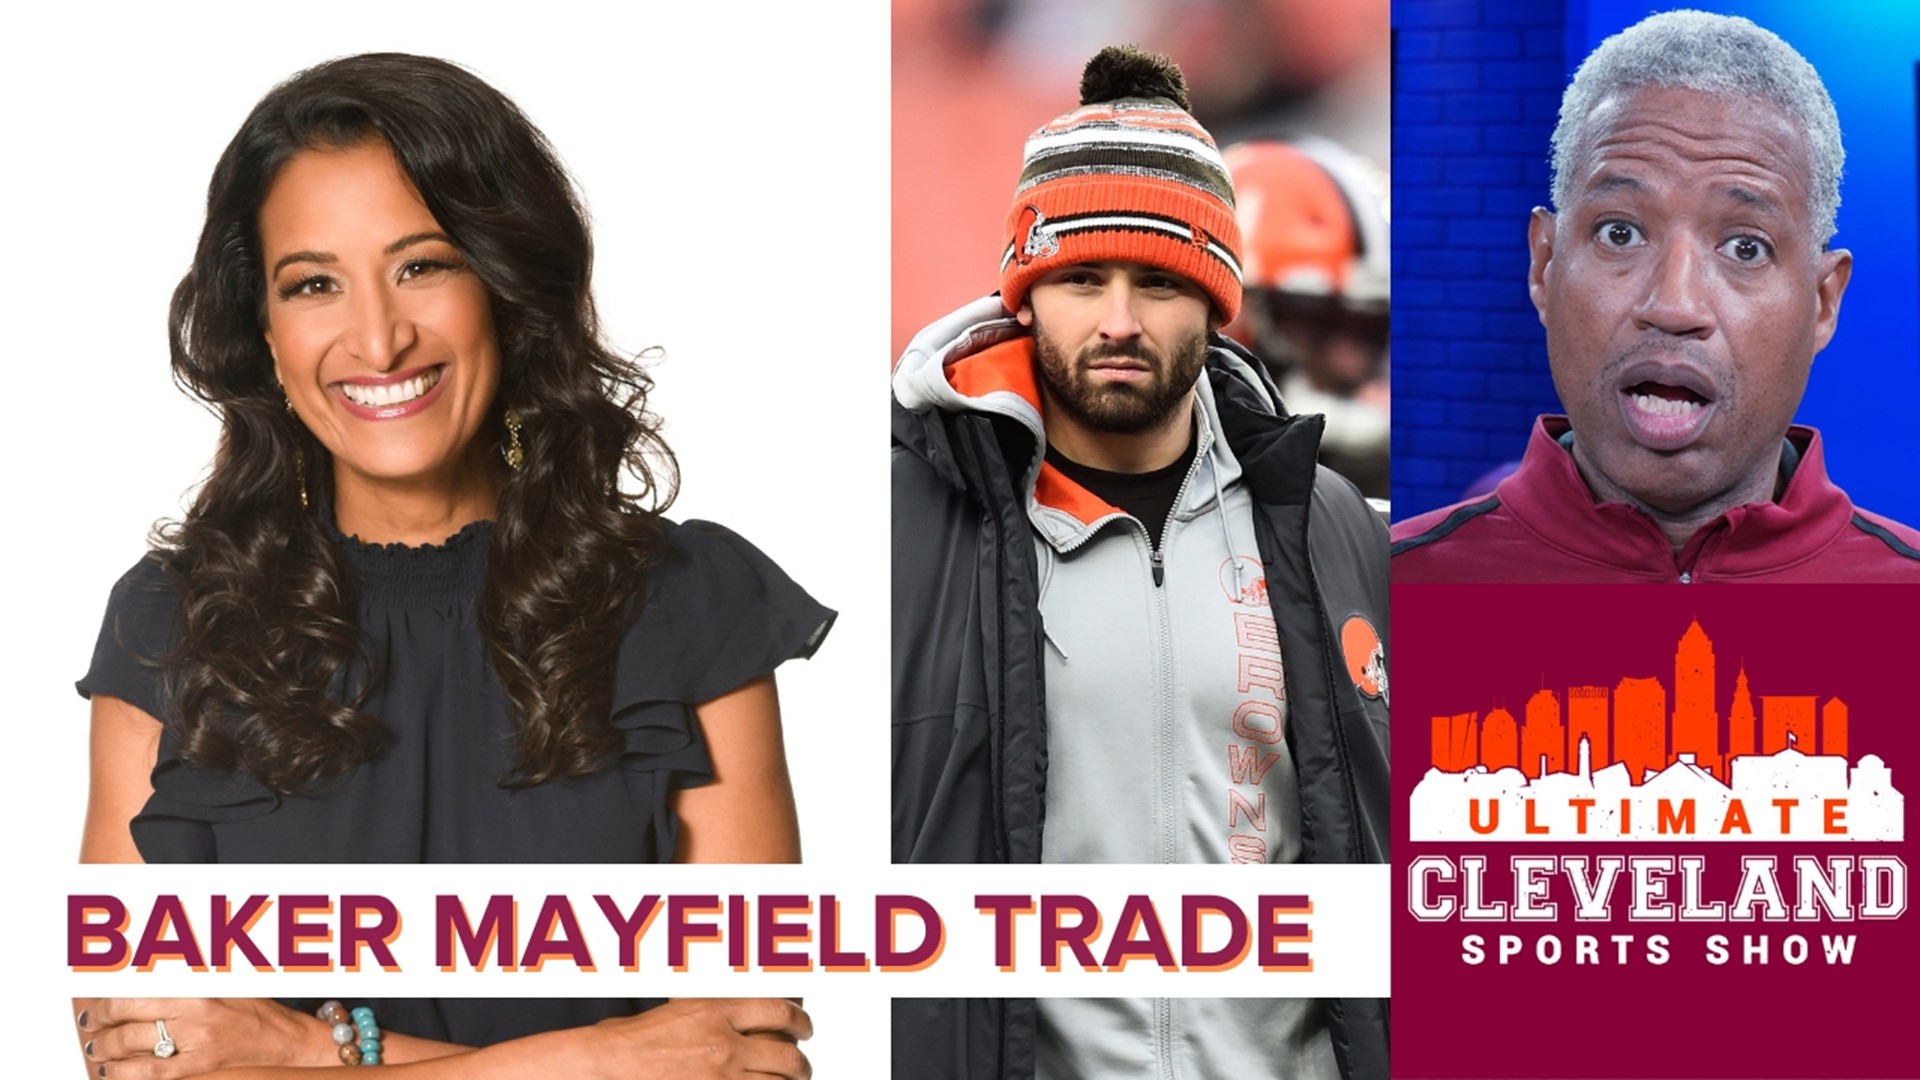 Aditi Kinkhabwala chimes in on the Deshaun Watson coverage and says it's basically tiring. She also suggests Baker Mayfield should go to the Seattle Seahawks & more.